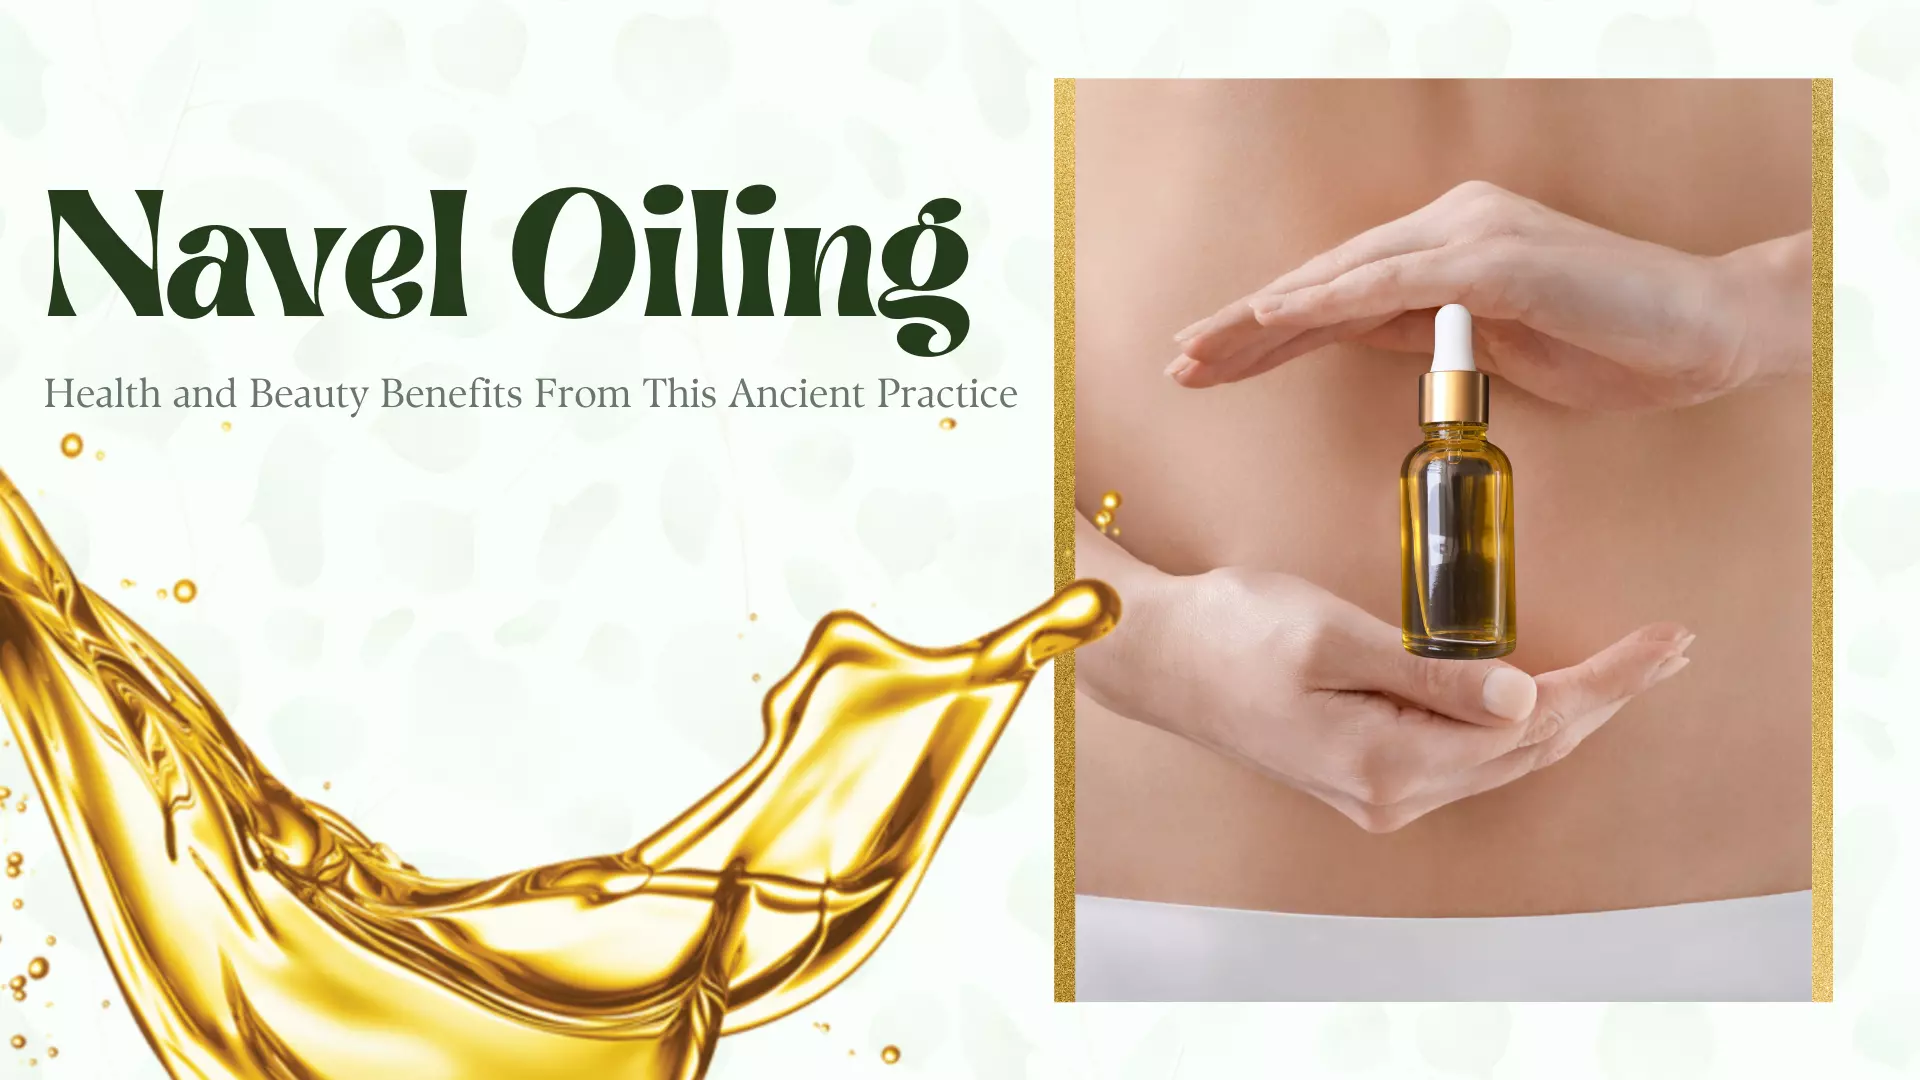 navel oiling